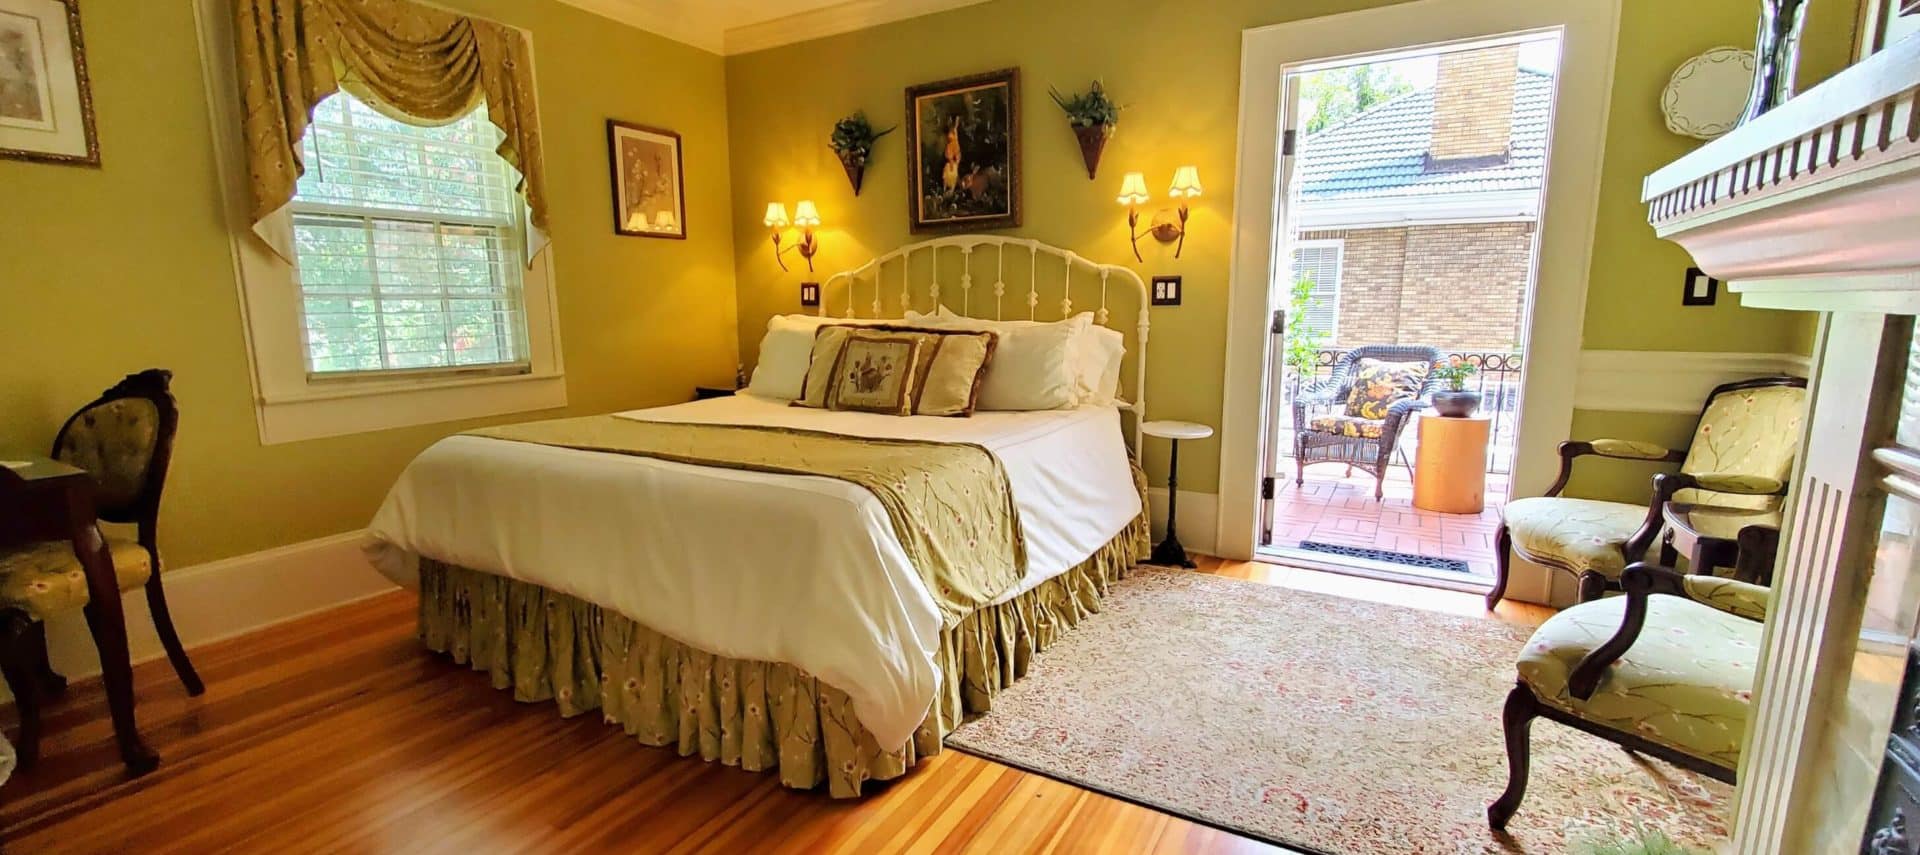 California king bed in room with open door to private balcony with chair.